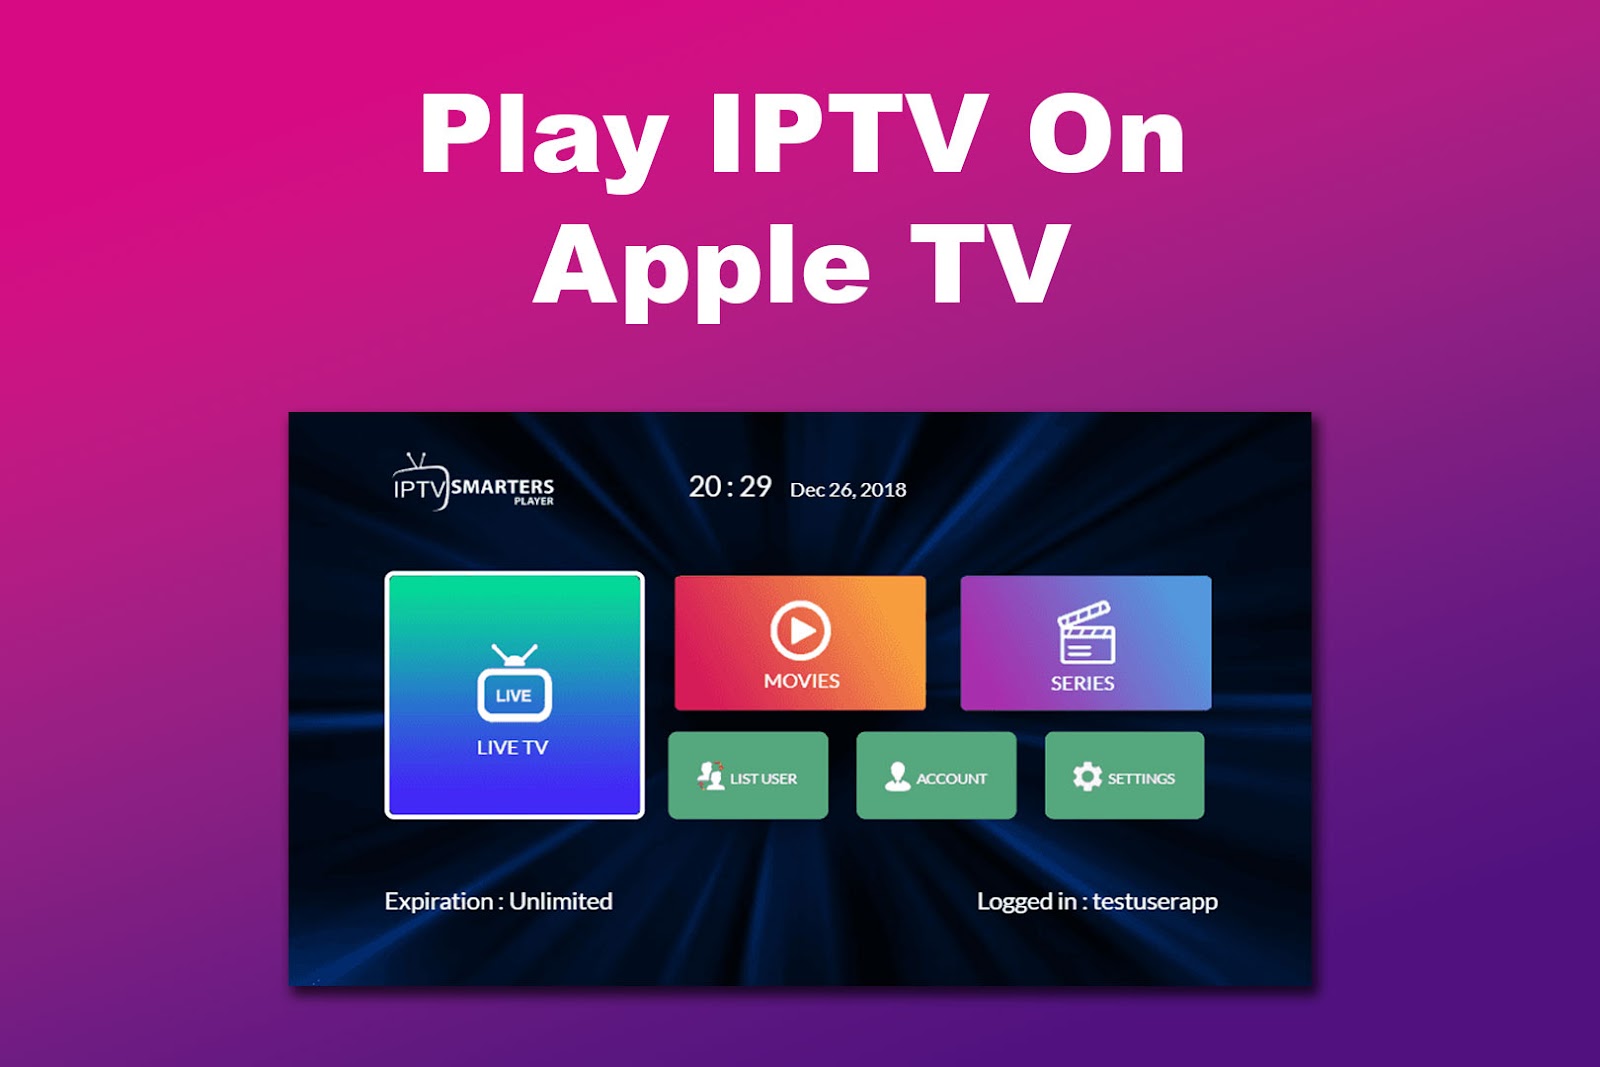 How To Play IPTV On Apple TV